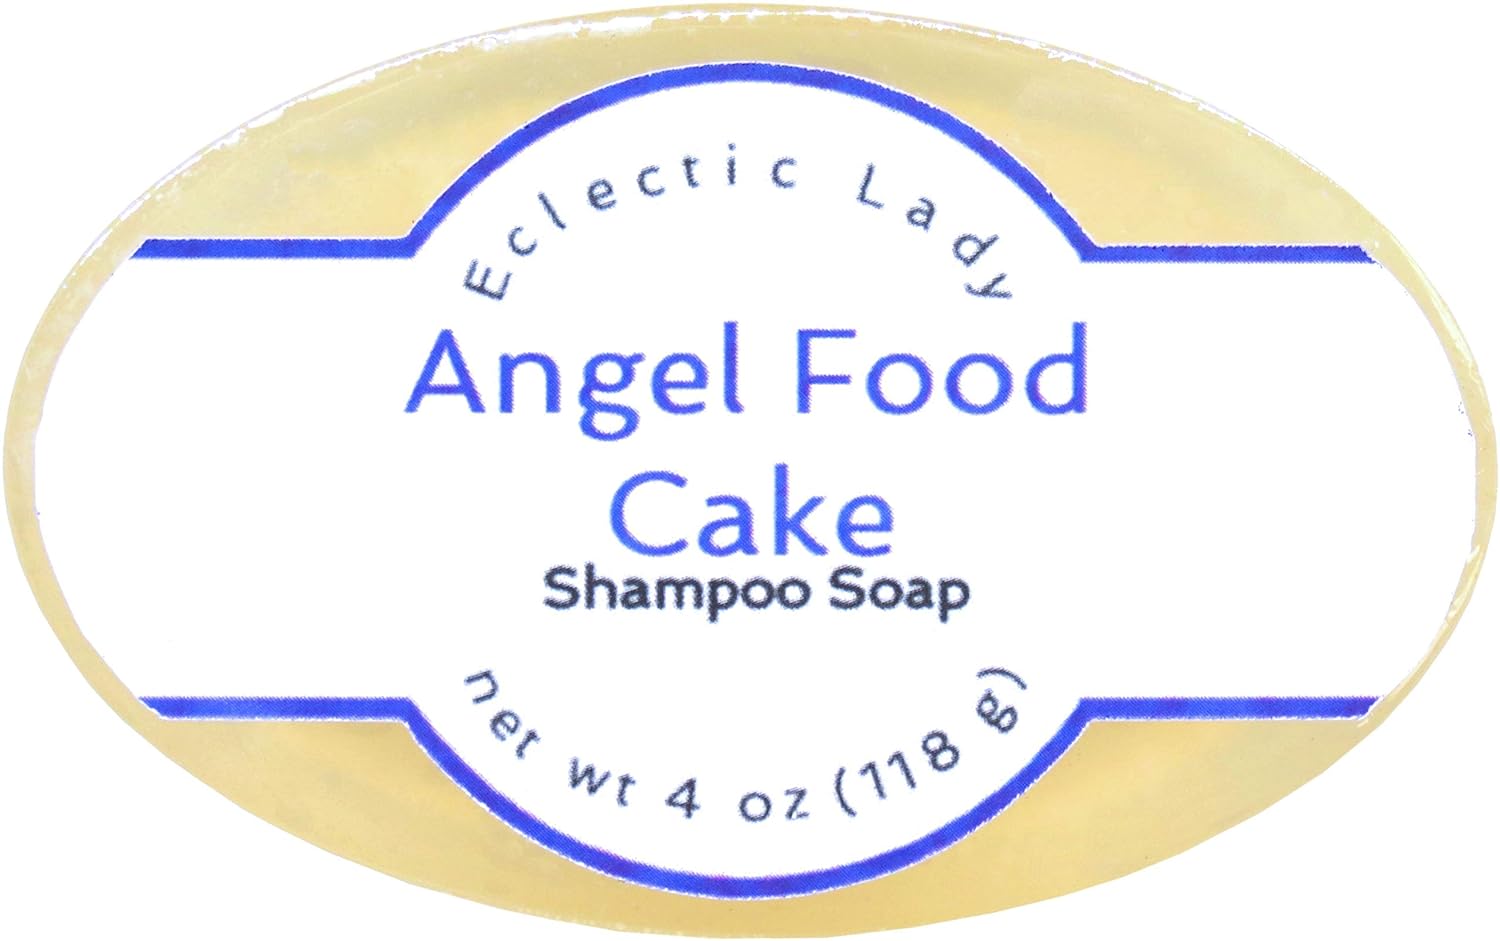 Eclectic Lady Angel Food Cake Shampoo Soap Bar with Pure Argan Oil, Silk Protein, Honey Protein and Extracts of Calendula ower, Aloe, Carrageenan, Sunower - 4  Bar